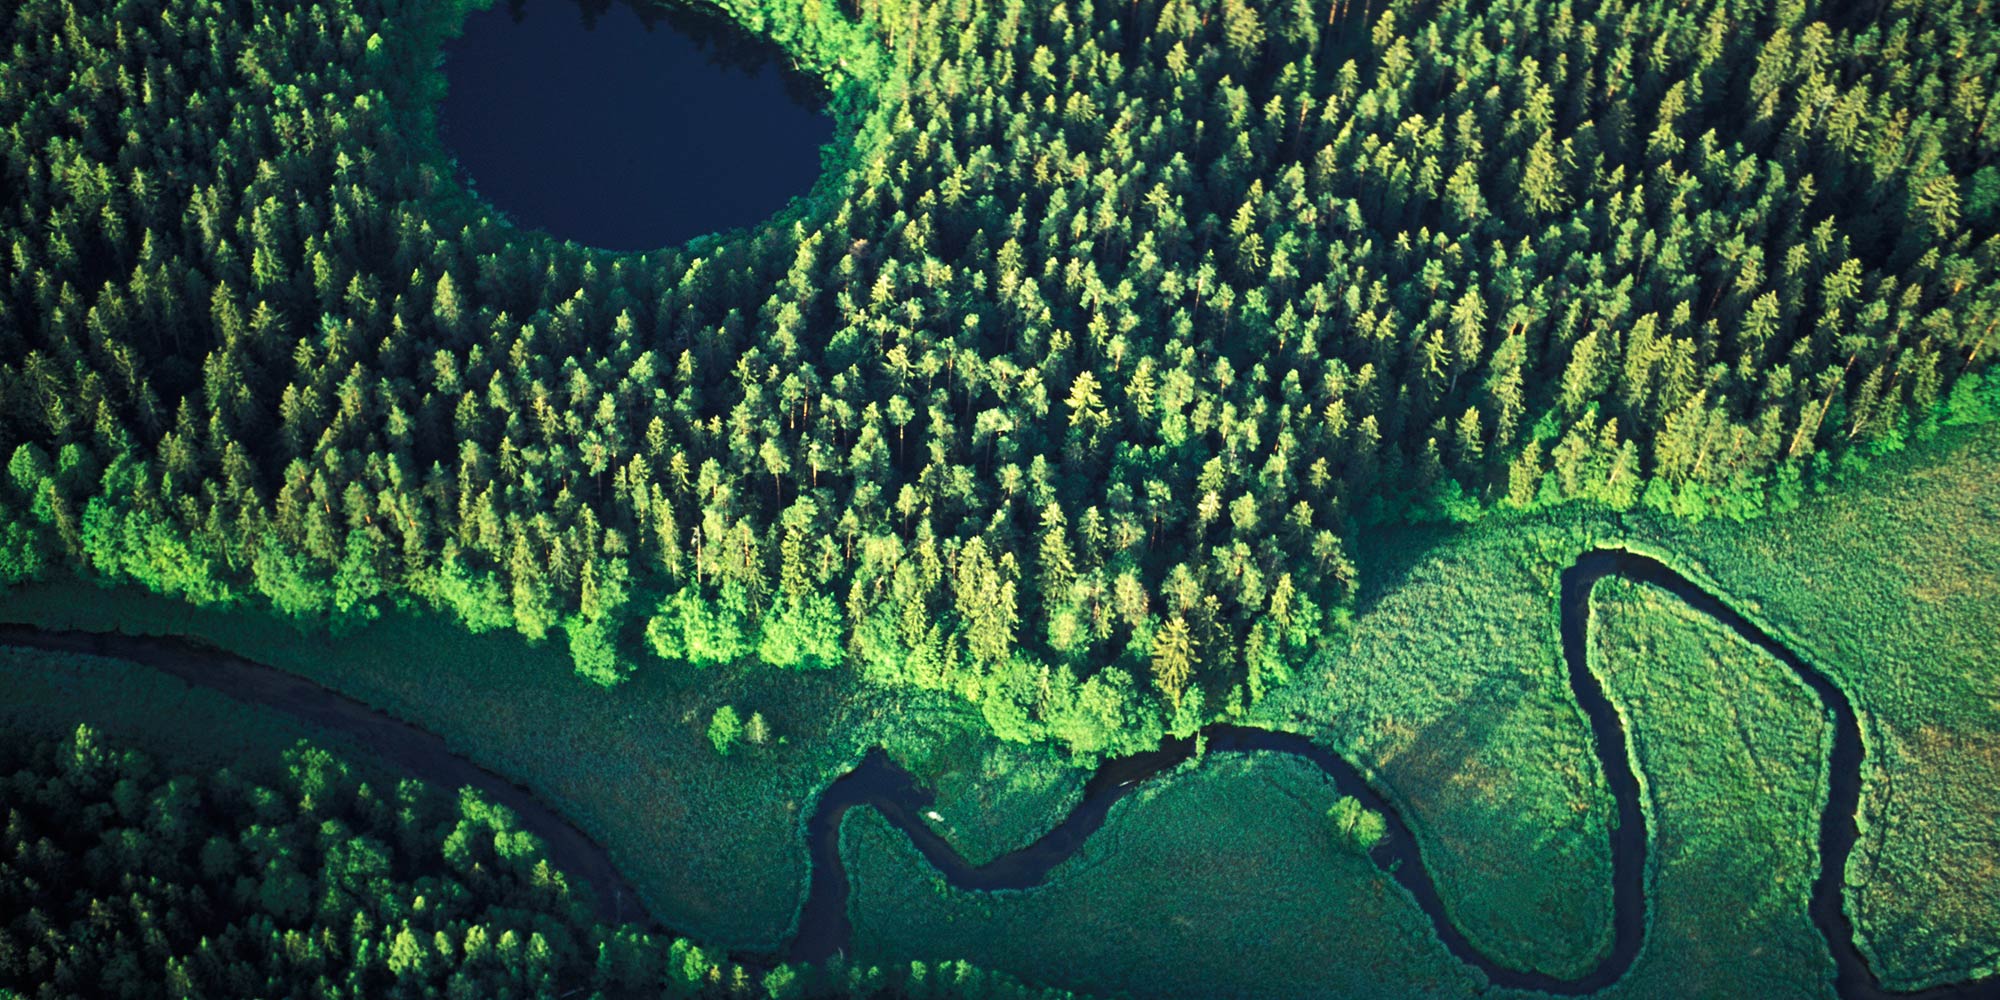 An aerial shot showing a river winding through green forrest and meadows.